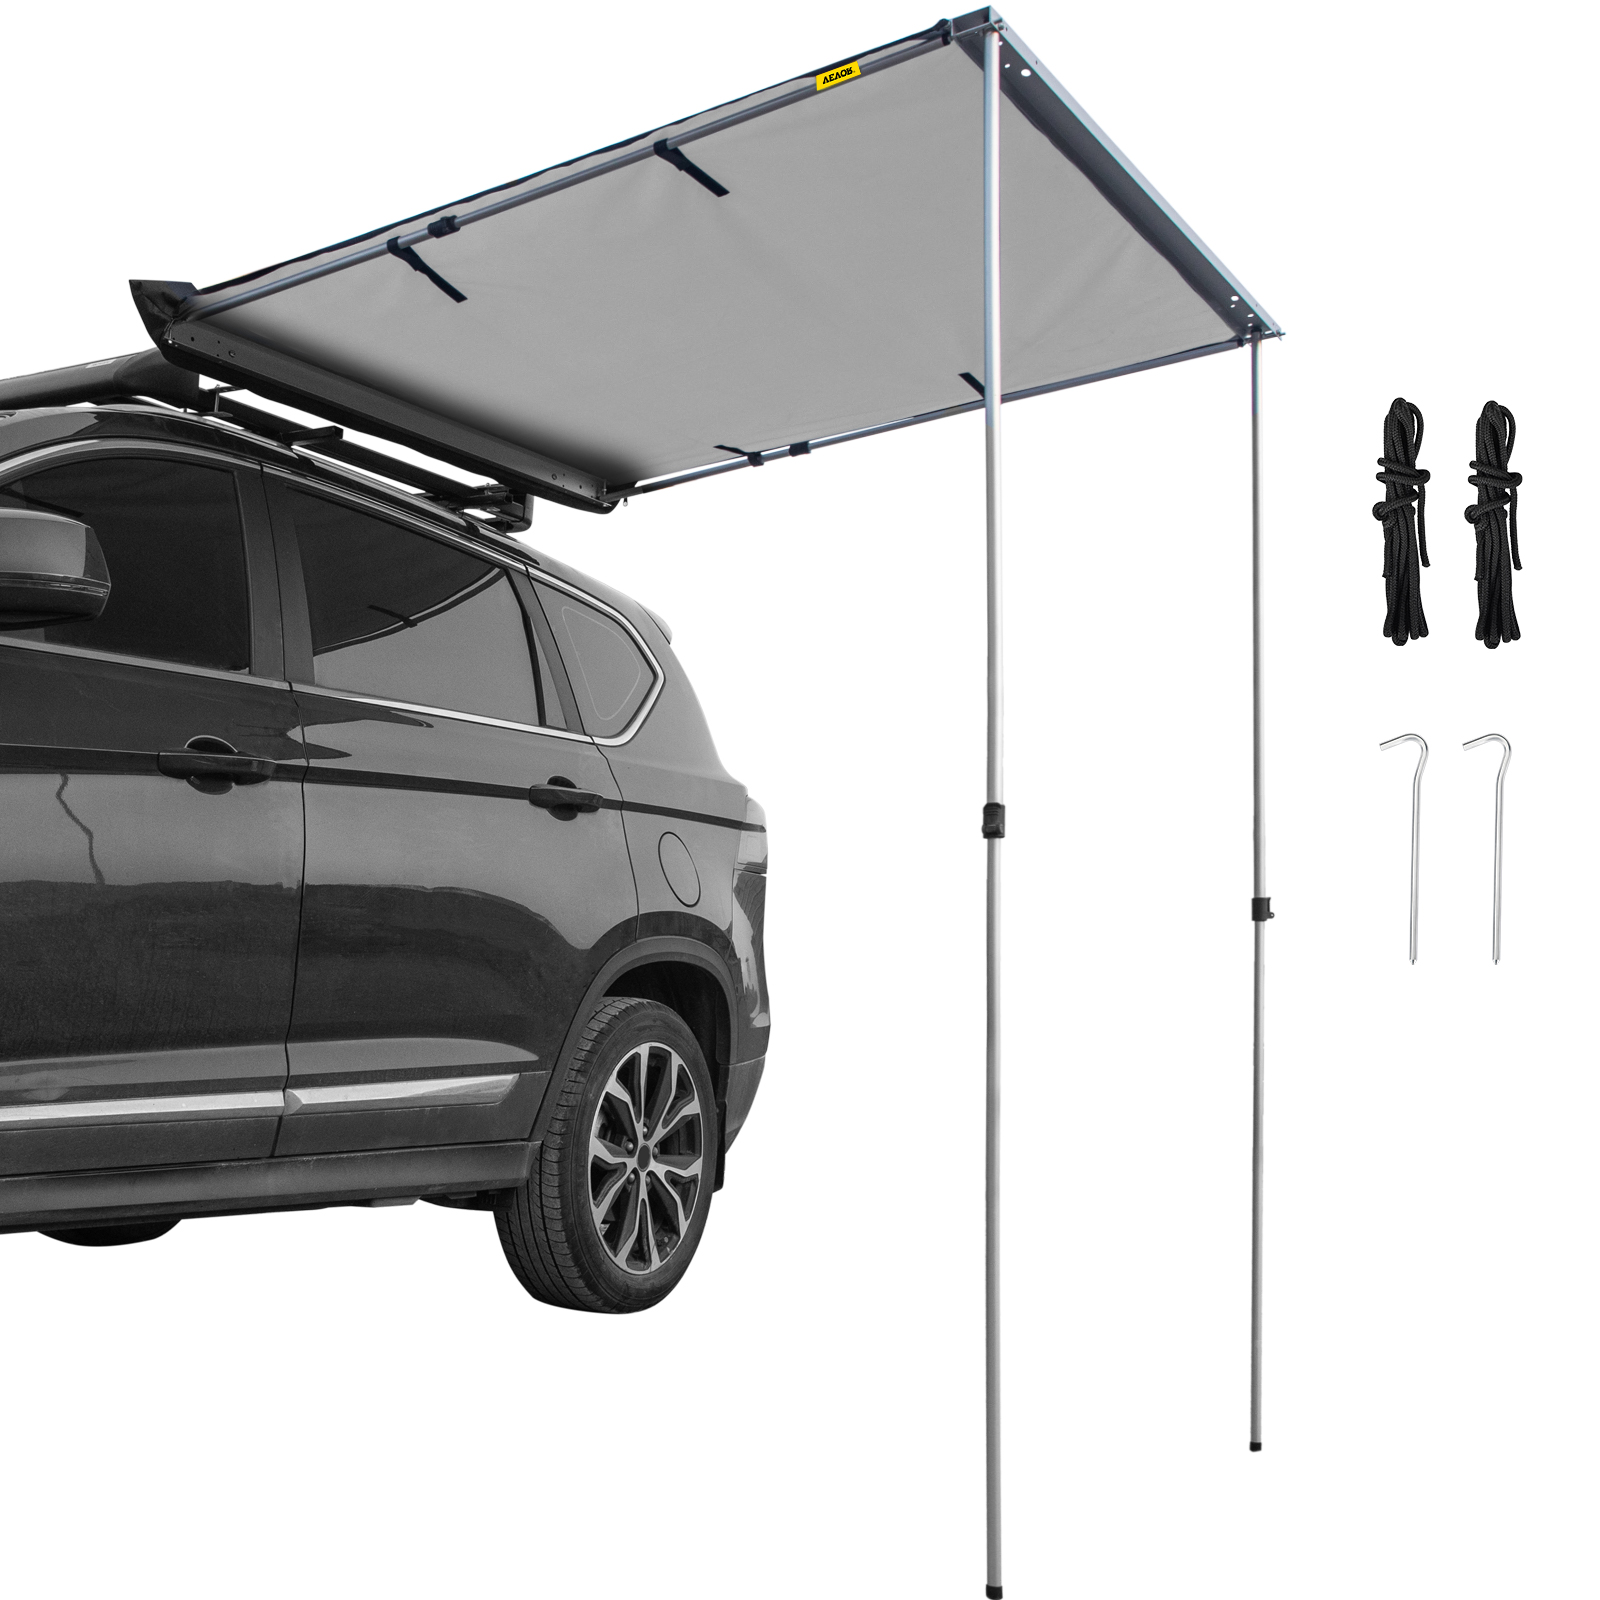 VEVOR Car Awning Car Tent Retractable Waterproof SUV Rooftop Grey 4.6'x6.6' от Vevor Many GEOs